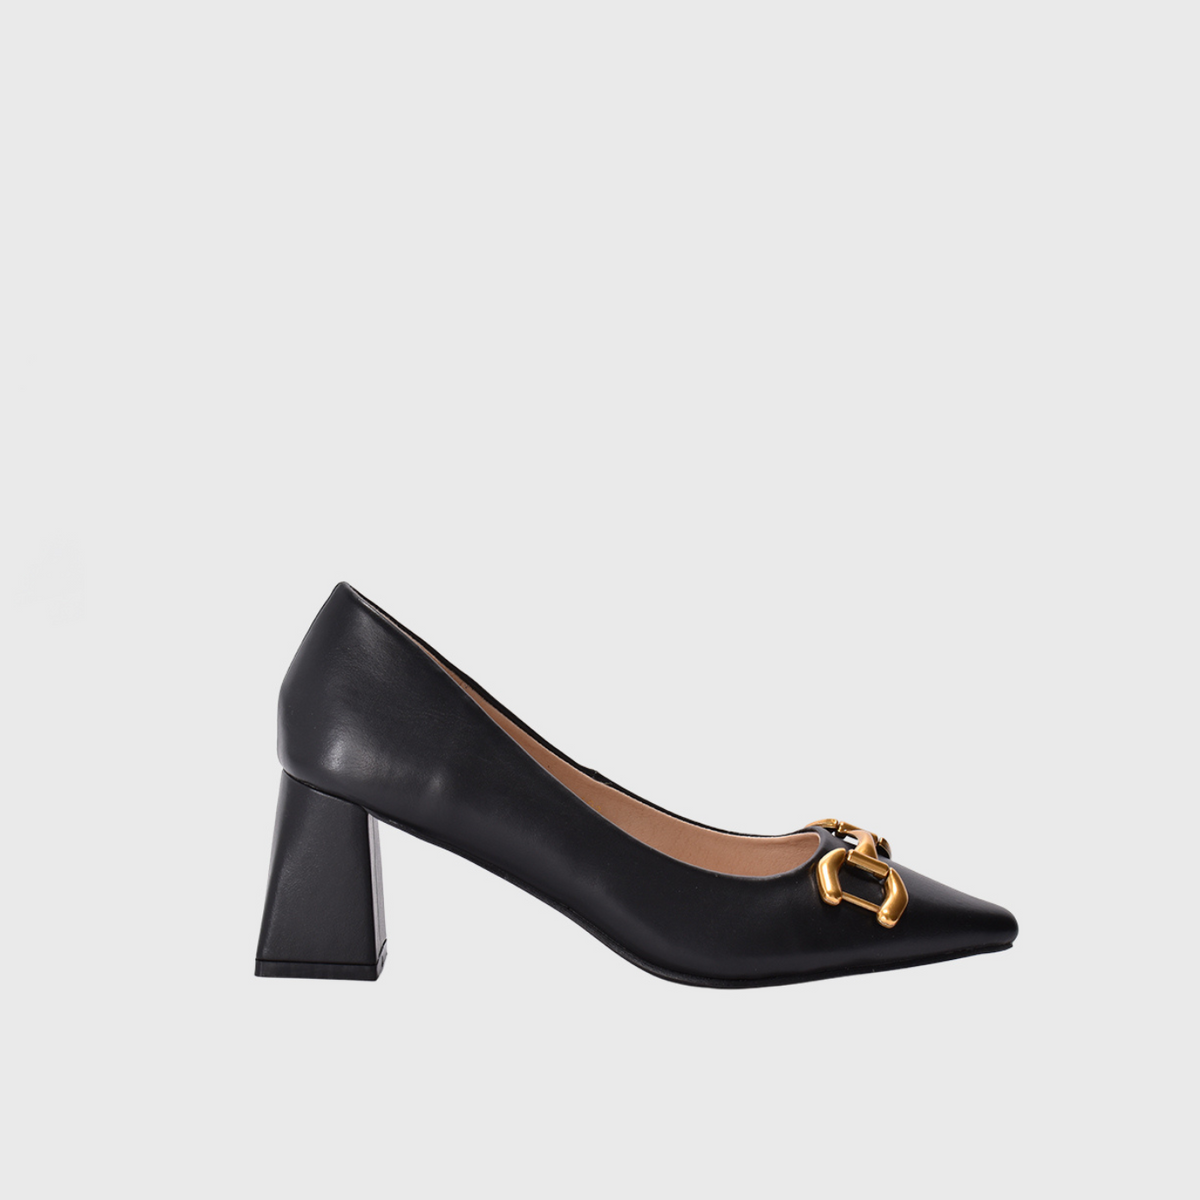 Pointed Black High Heels with Buckle Gold